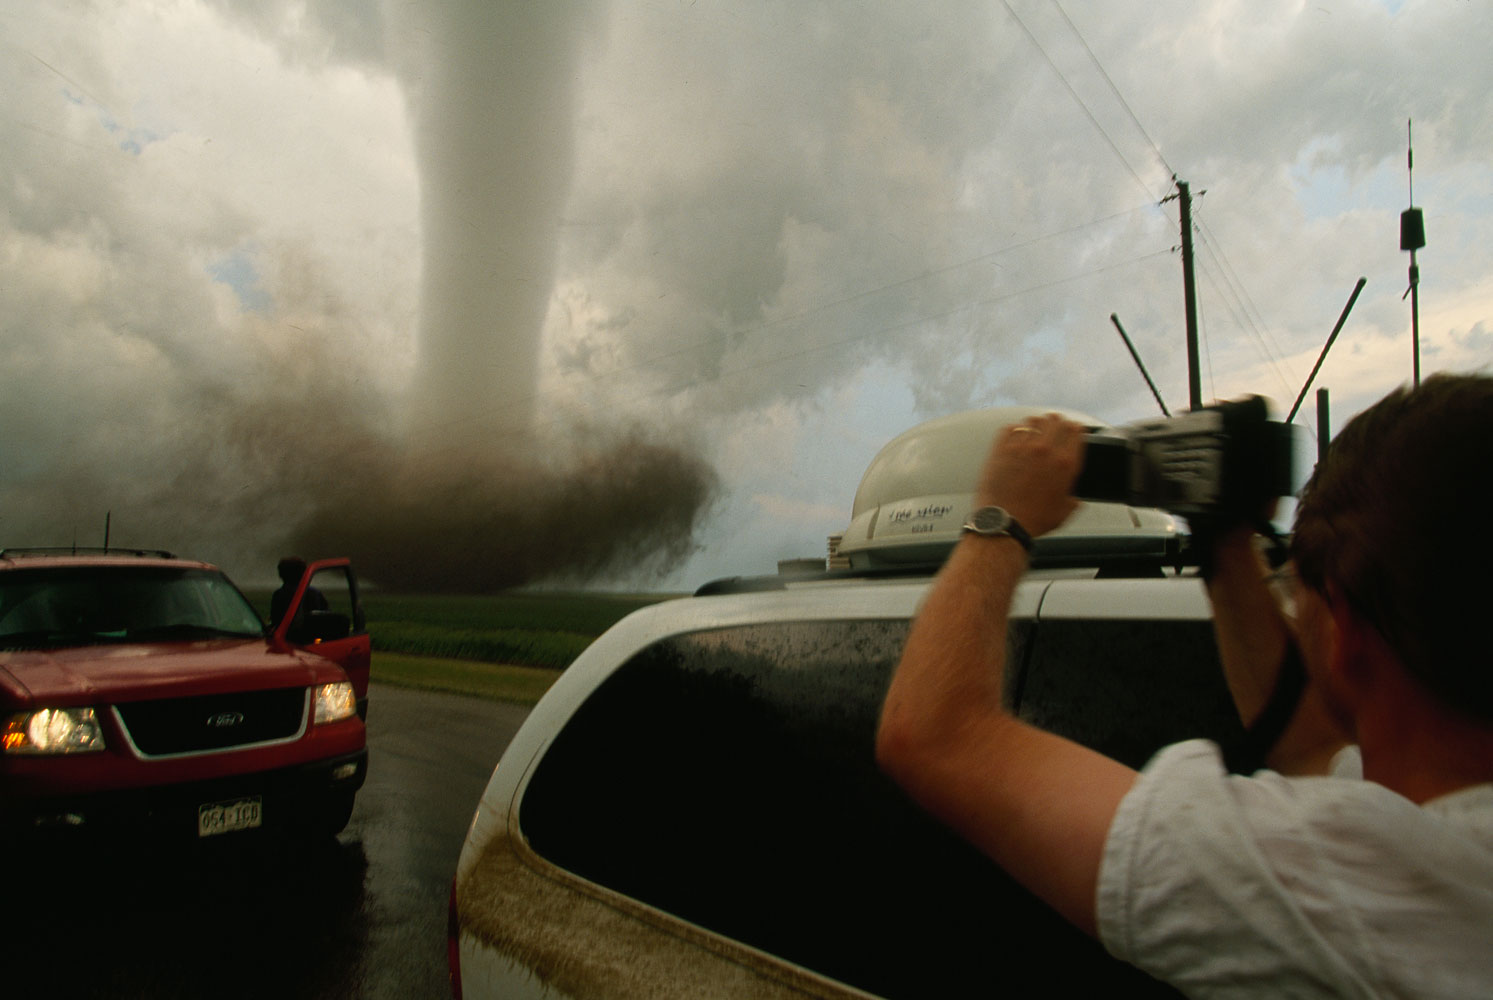 A storm chaser video taping a tornado in South Dakota, March 25, 2010. (Carsten Peter—National Geographic/Getty Images)